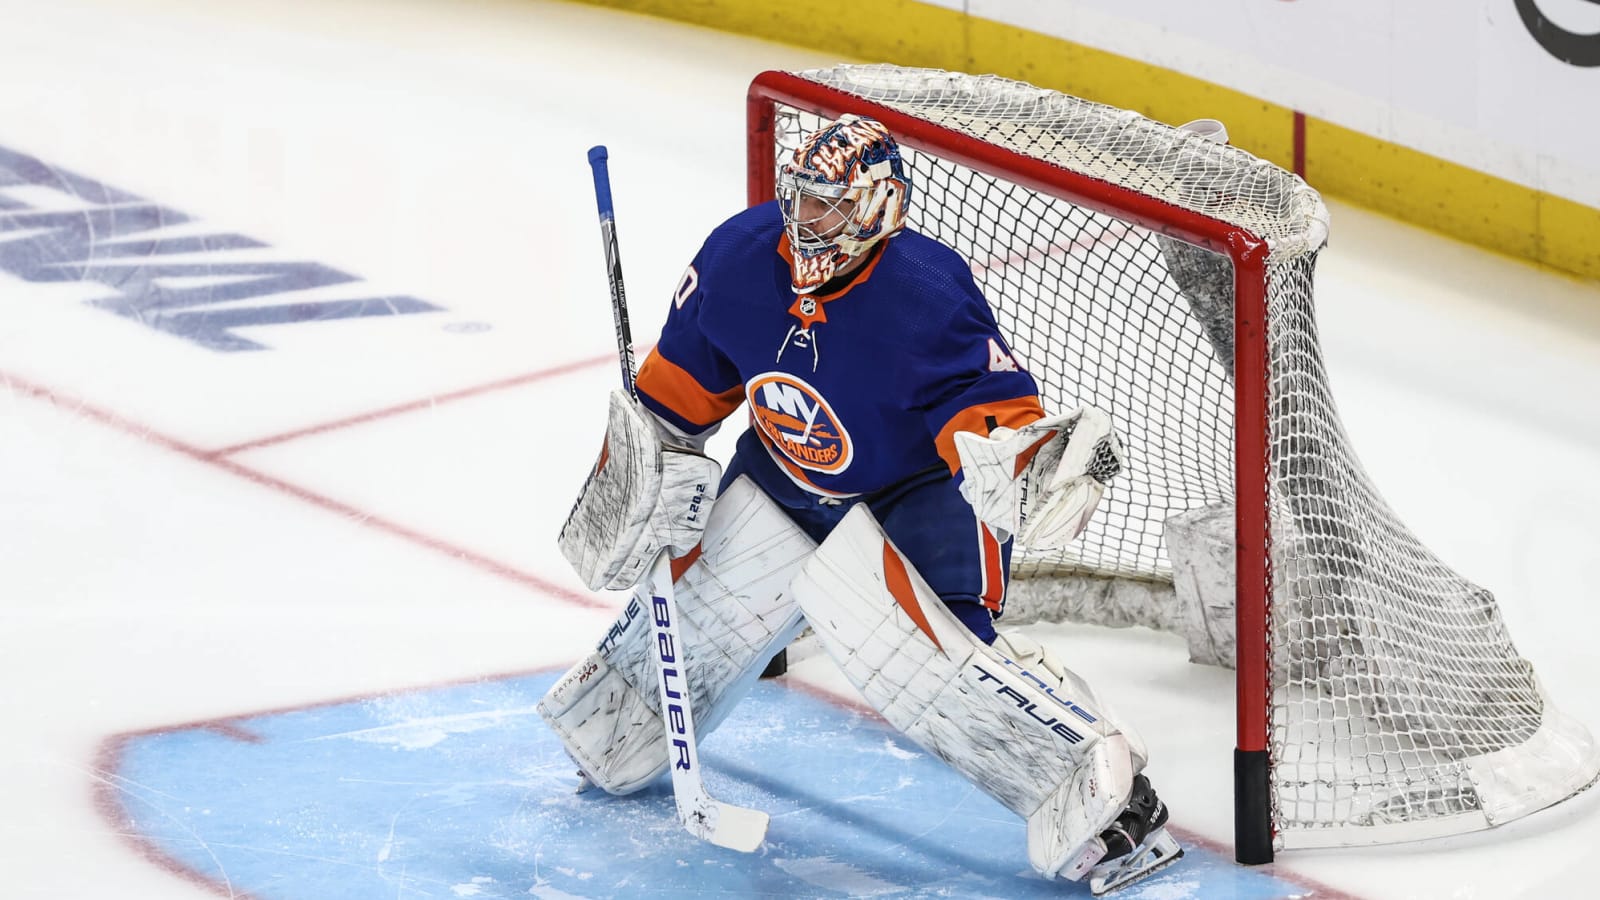 Varlamov Continues to Provide Steady Goaltending for the Islanders